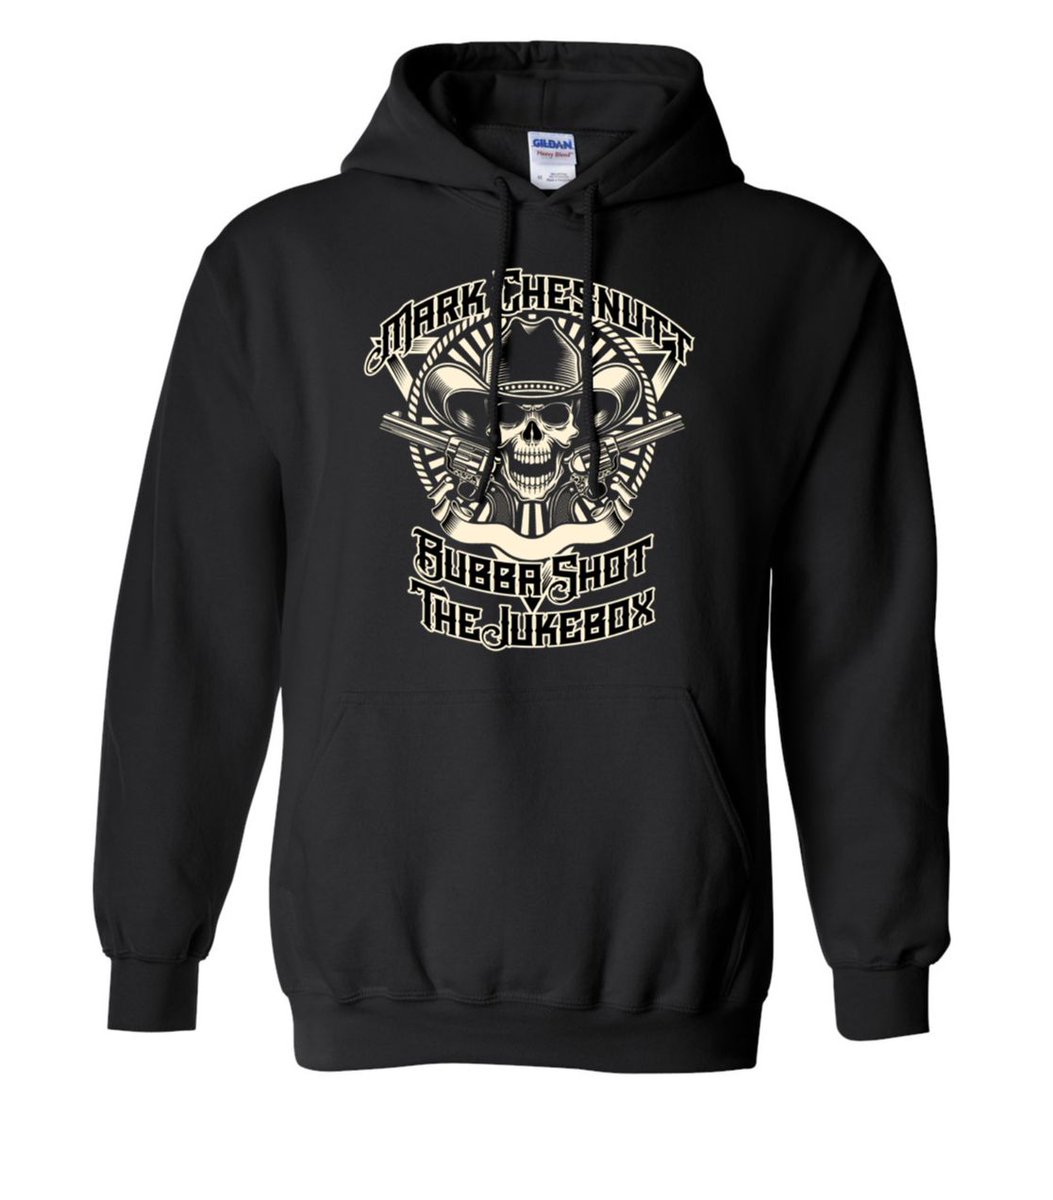 Fall is here! Grab the new 'Bubba Shot The Jukebox' Hoodie: officialmarkchesnutt.myshopify.com/products/bubba…